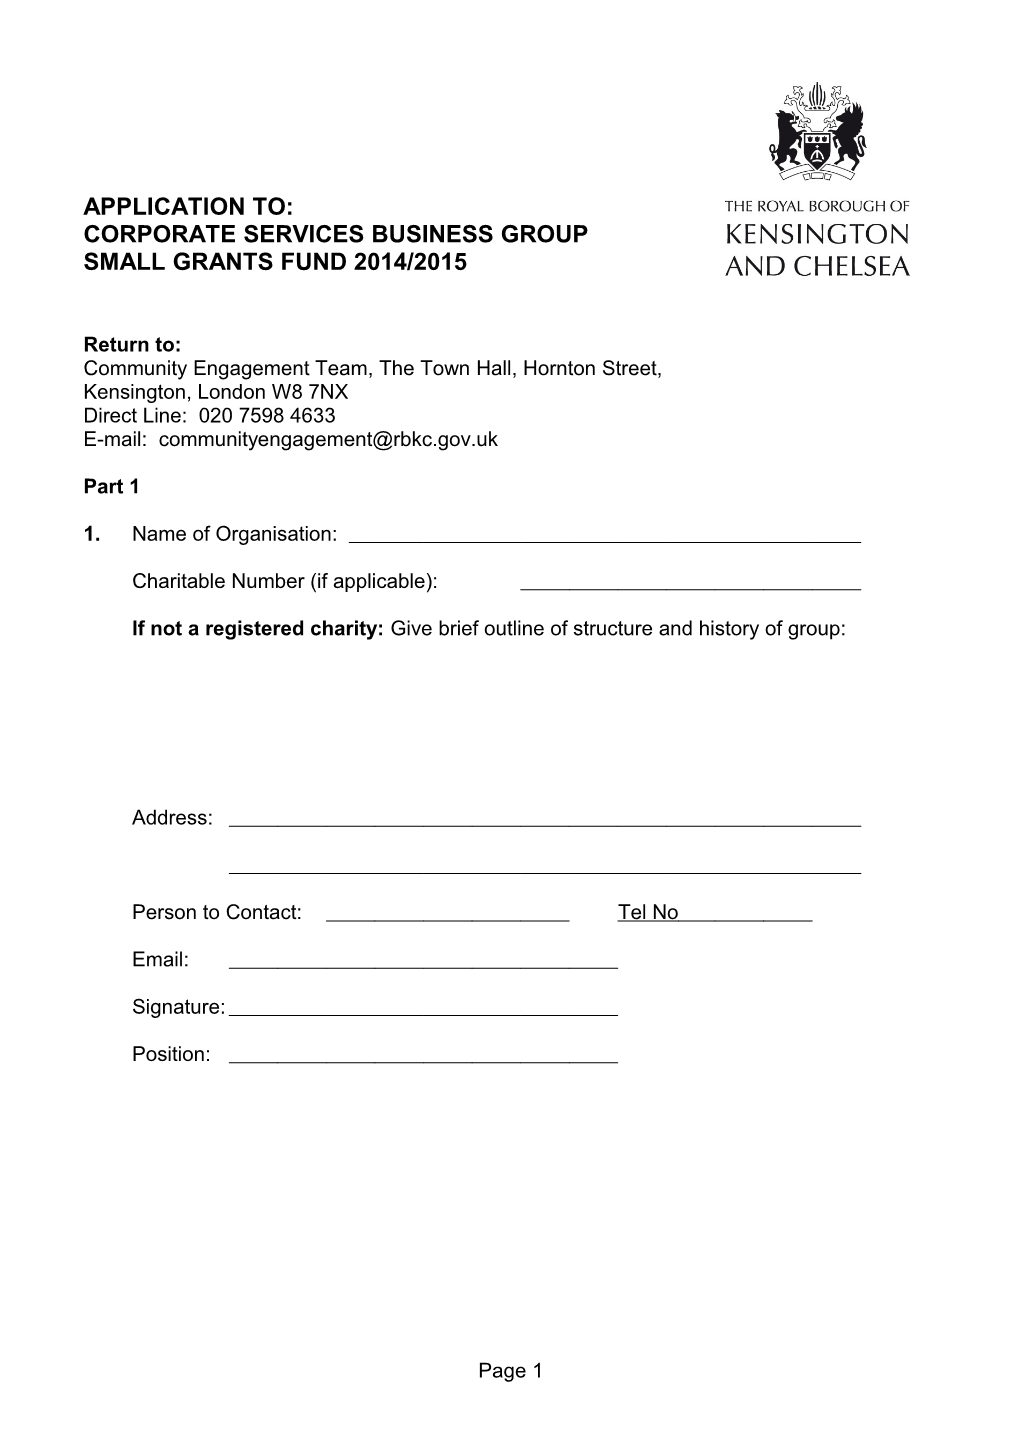 Corporate Services One Off Grant Application